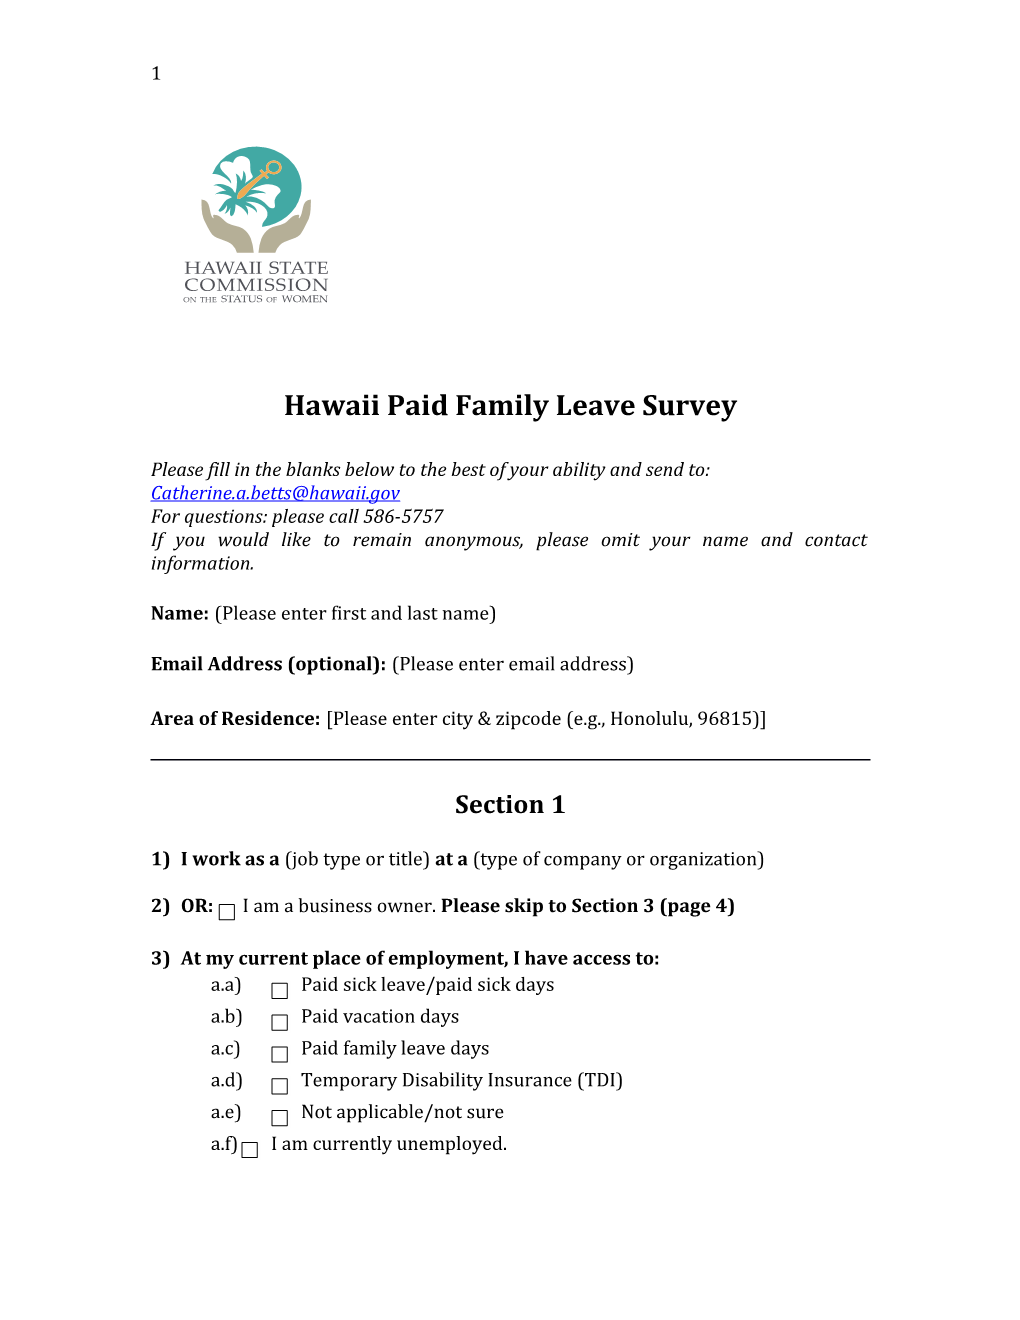 Hawaii Paid Family Leave Survey